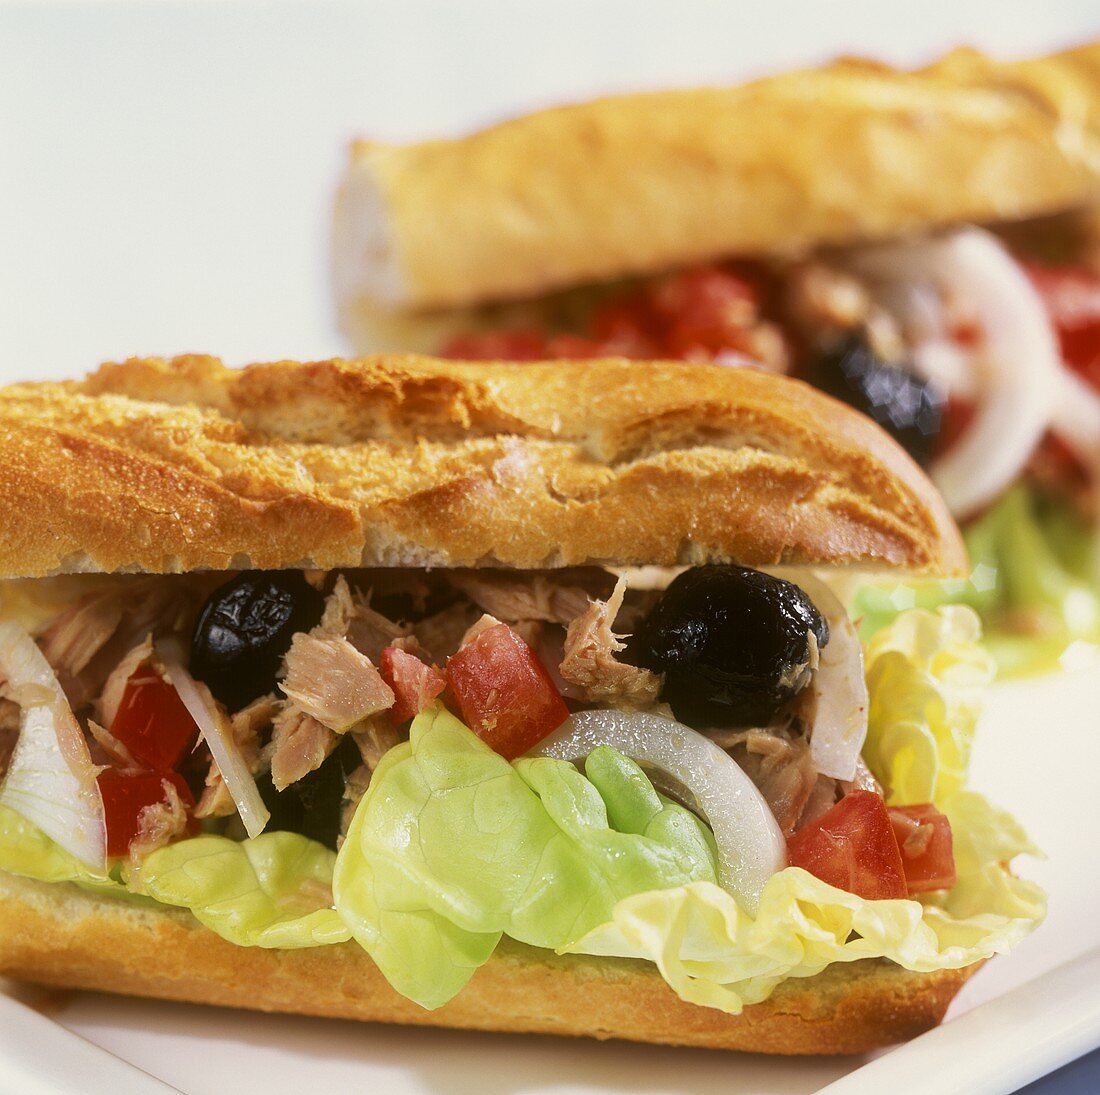 Baguette with tuna, olives and tomatoes